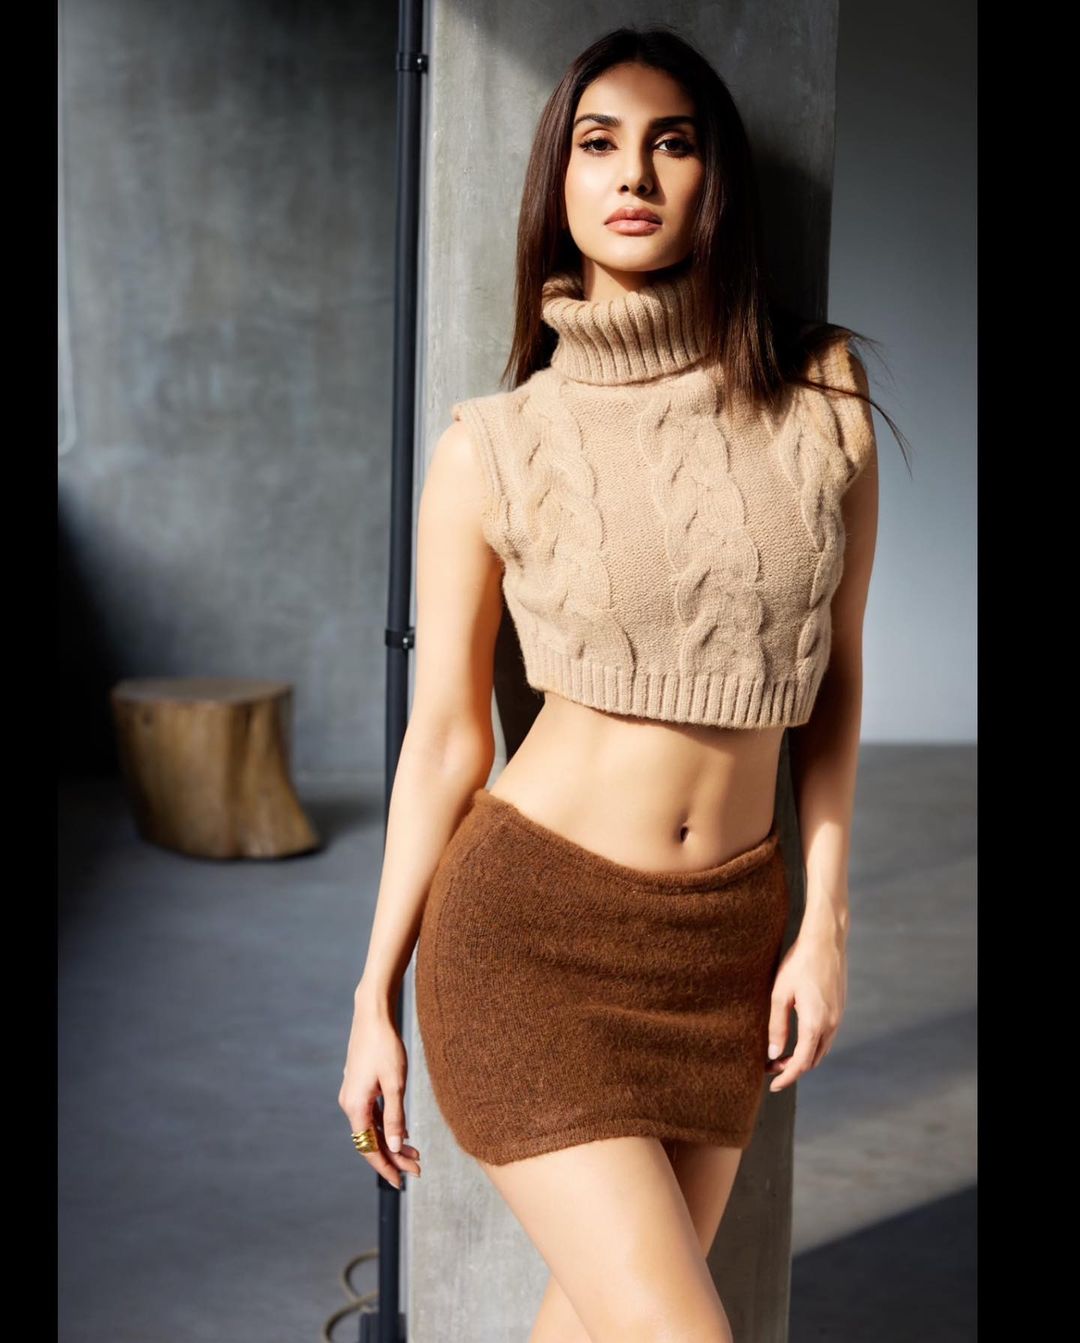 Vaani Kapoor Photo Shoot in Winter Collection High Neck Top and Skirt, Jan 2023